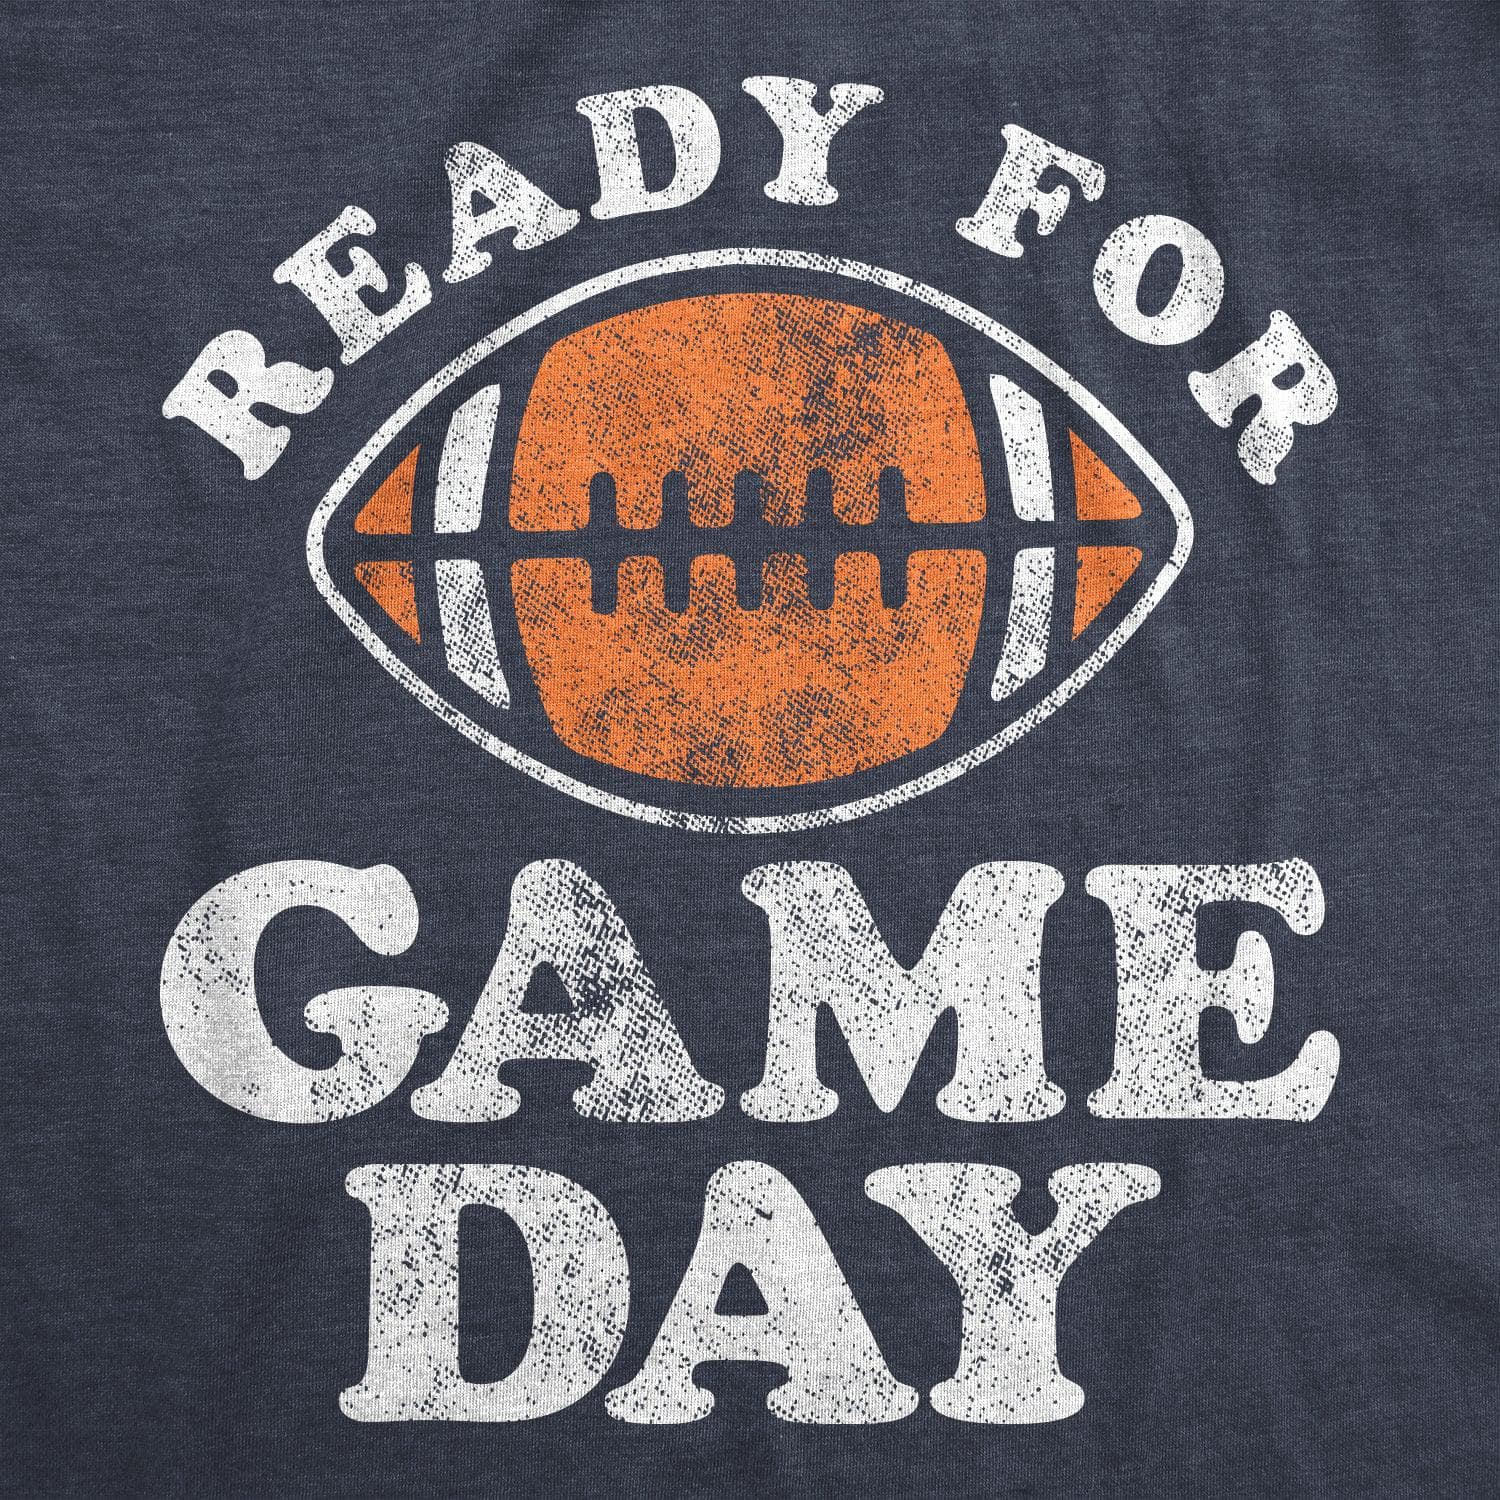 Ready For Game Day Men's Tshirt  -  Crazy Dog T-Shirts